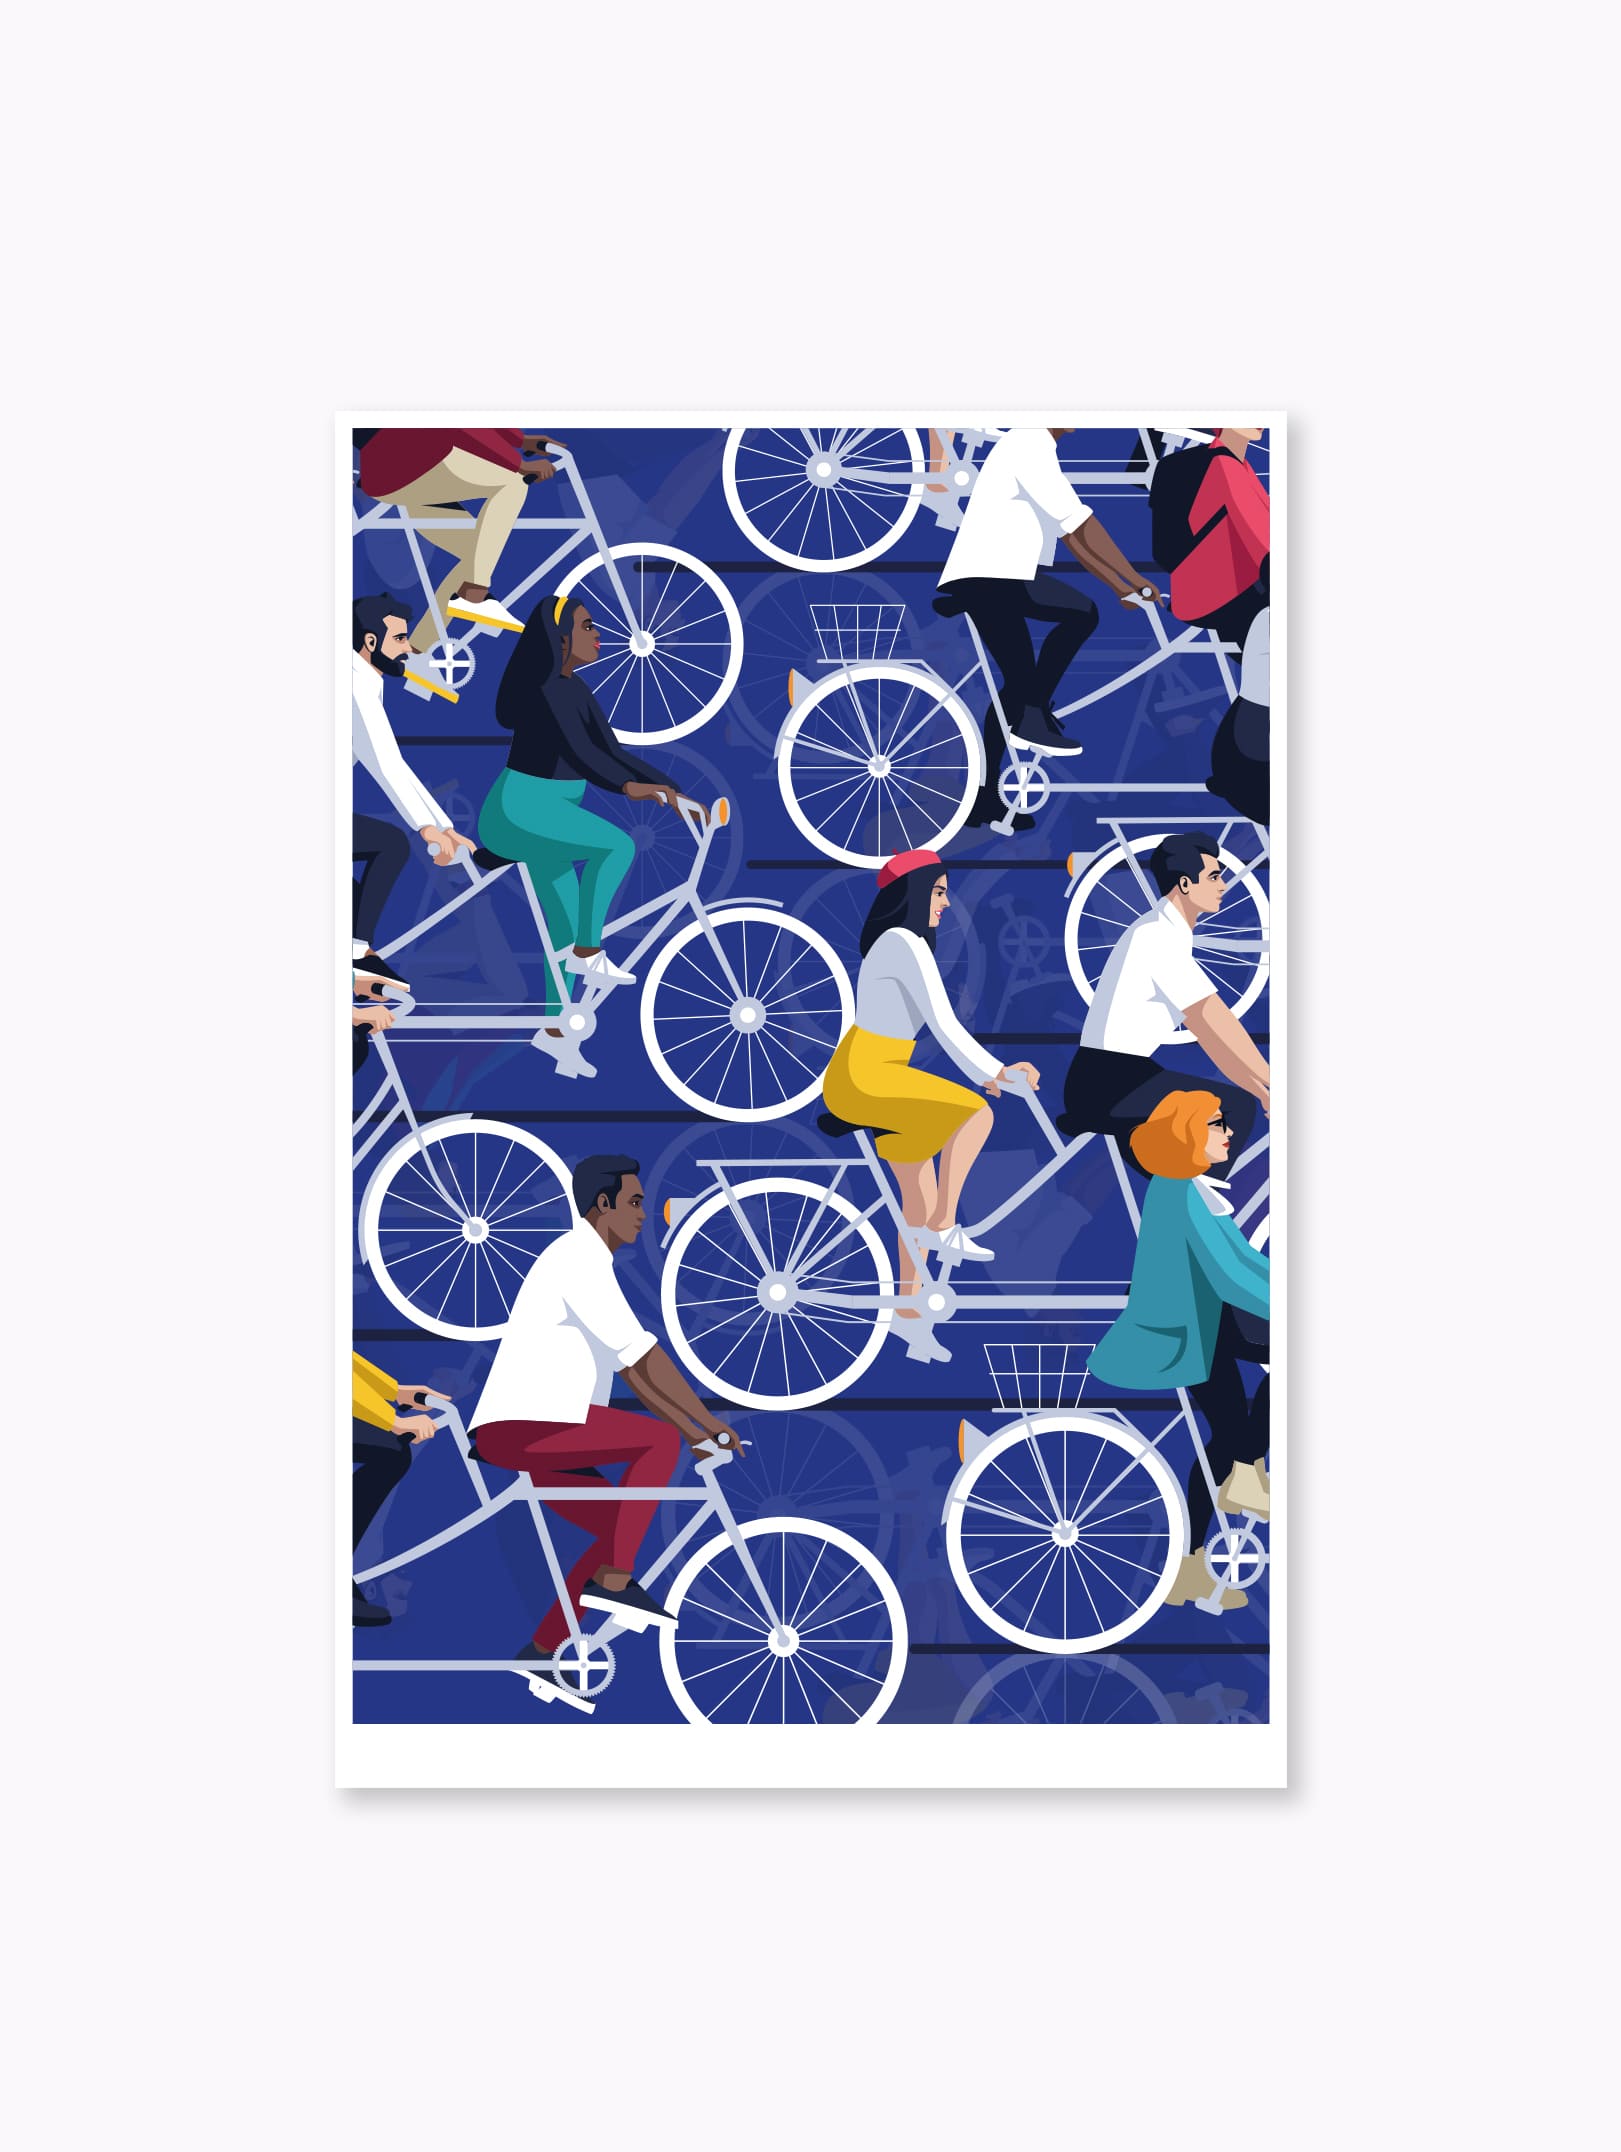 Illustration for the Representation of the European Commission in Spain - Cyclists print